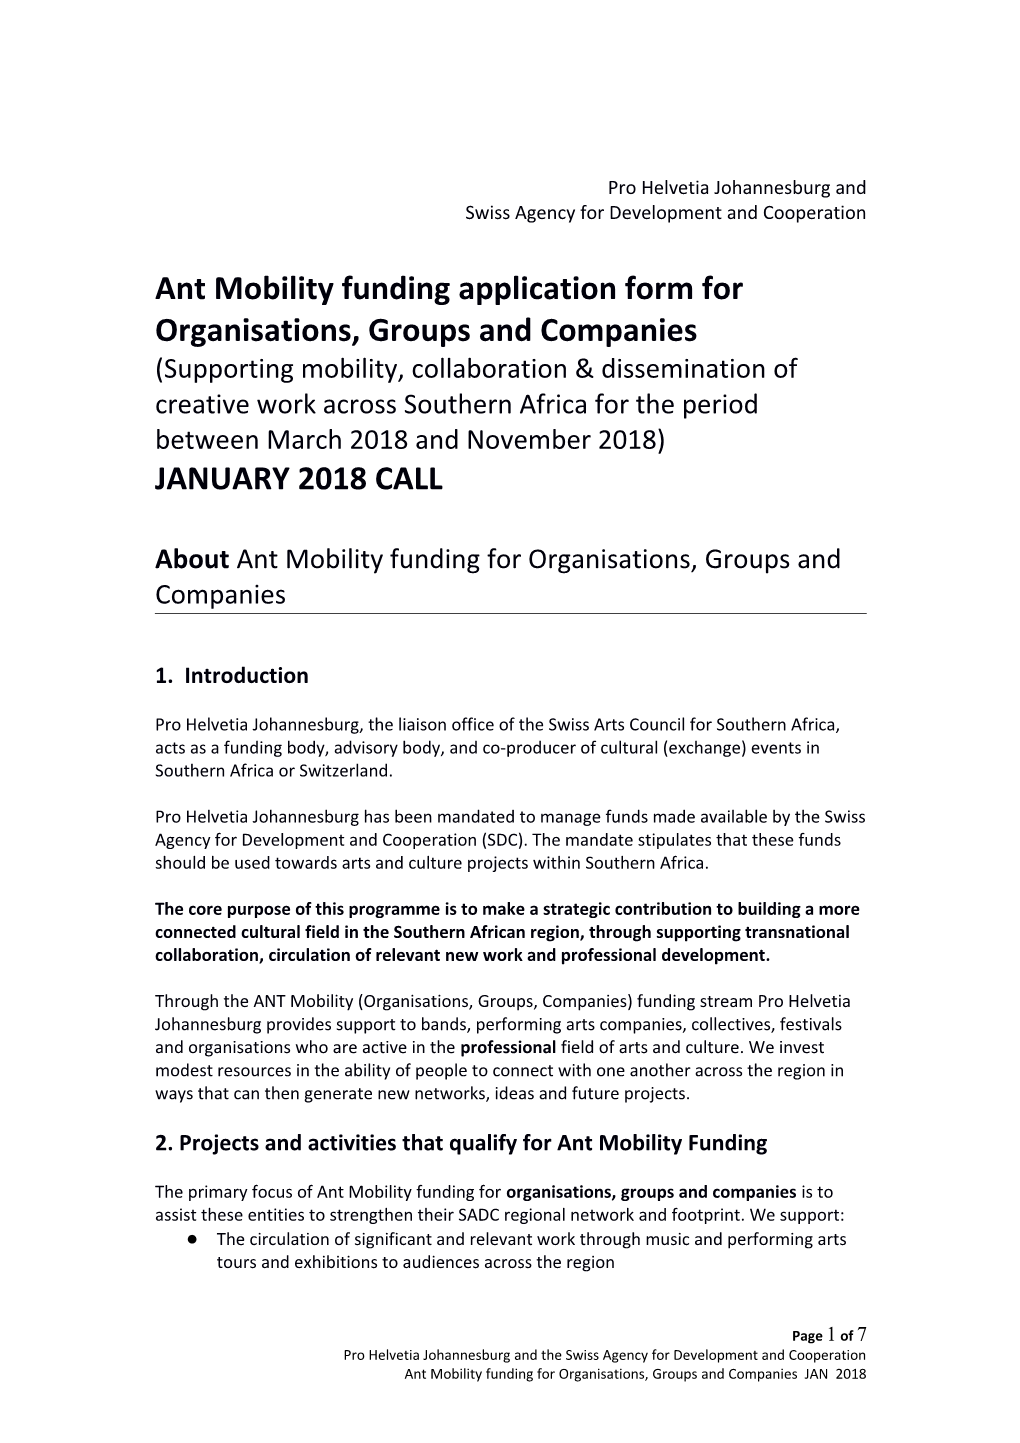 Ant Mobility Funding Application Form for Organisations, Groups and Companies